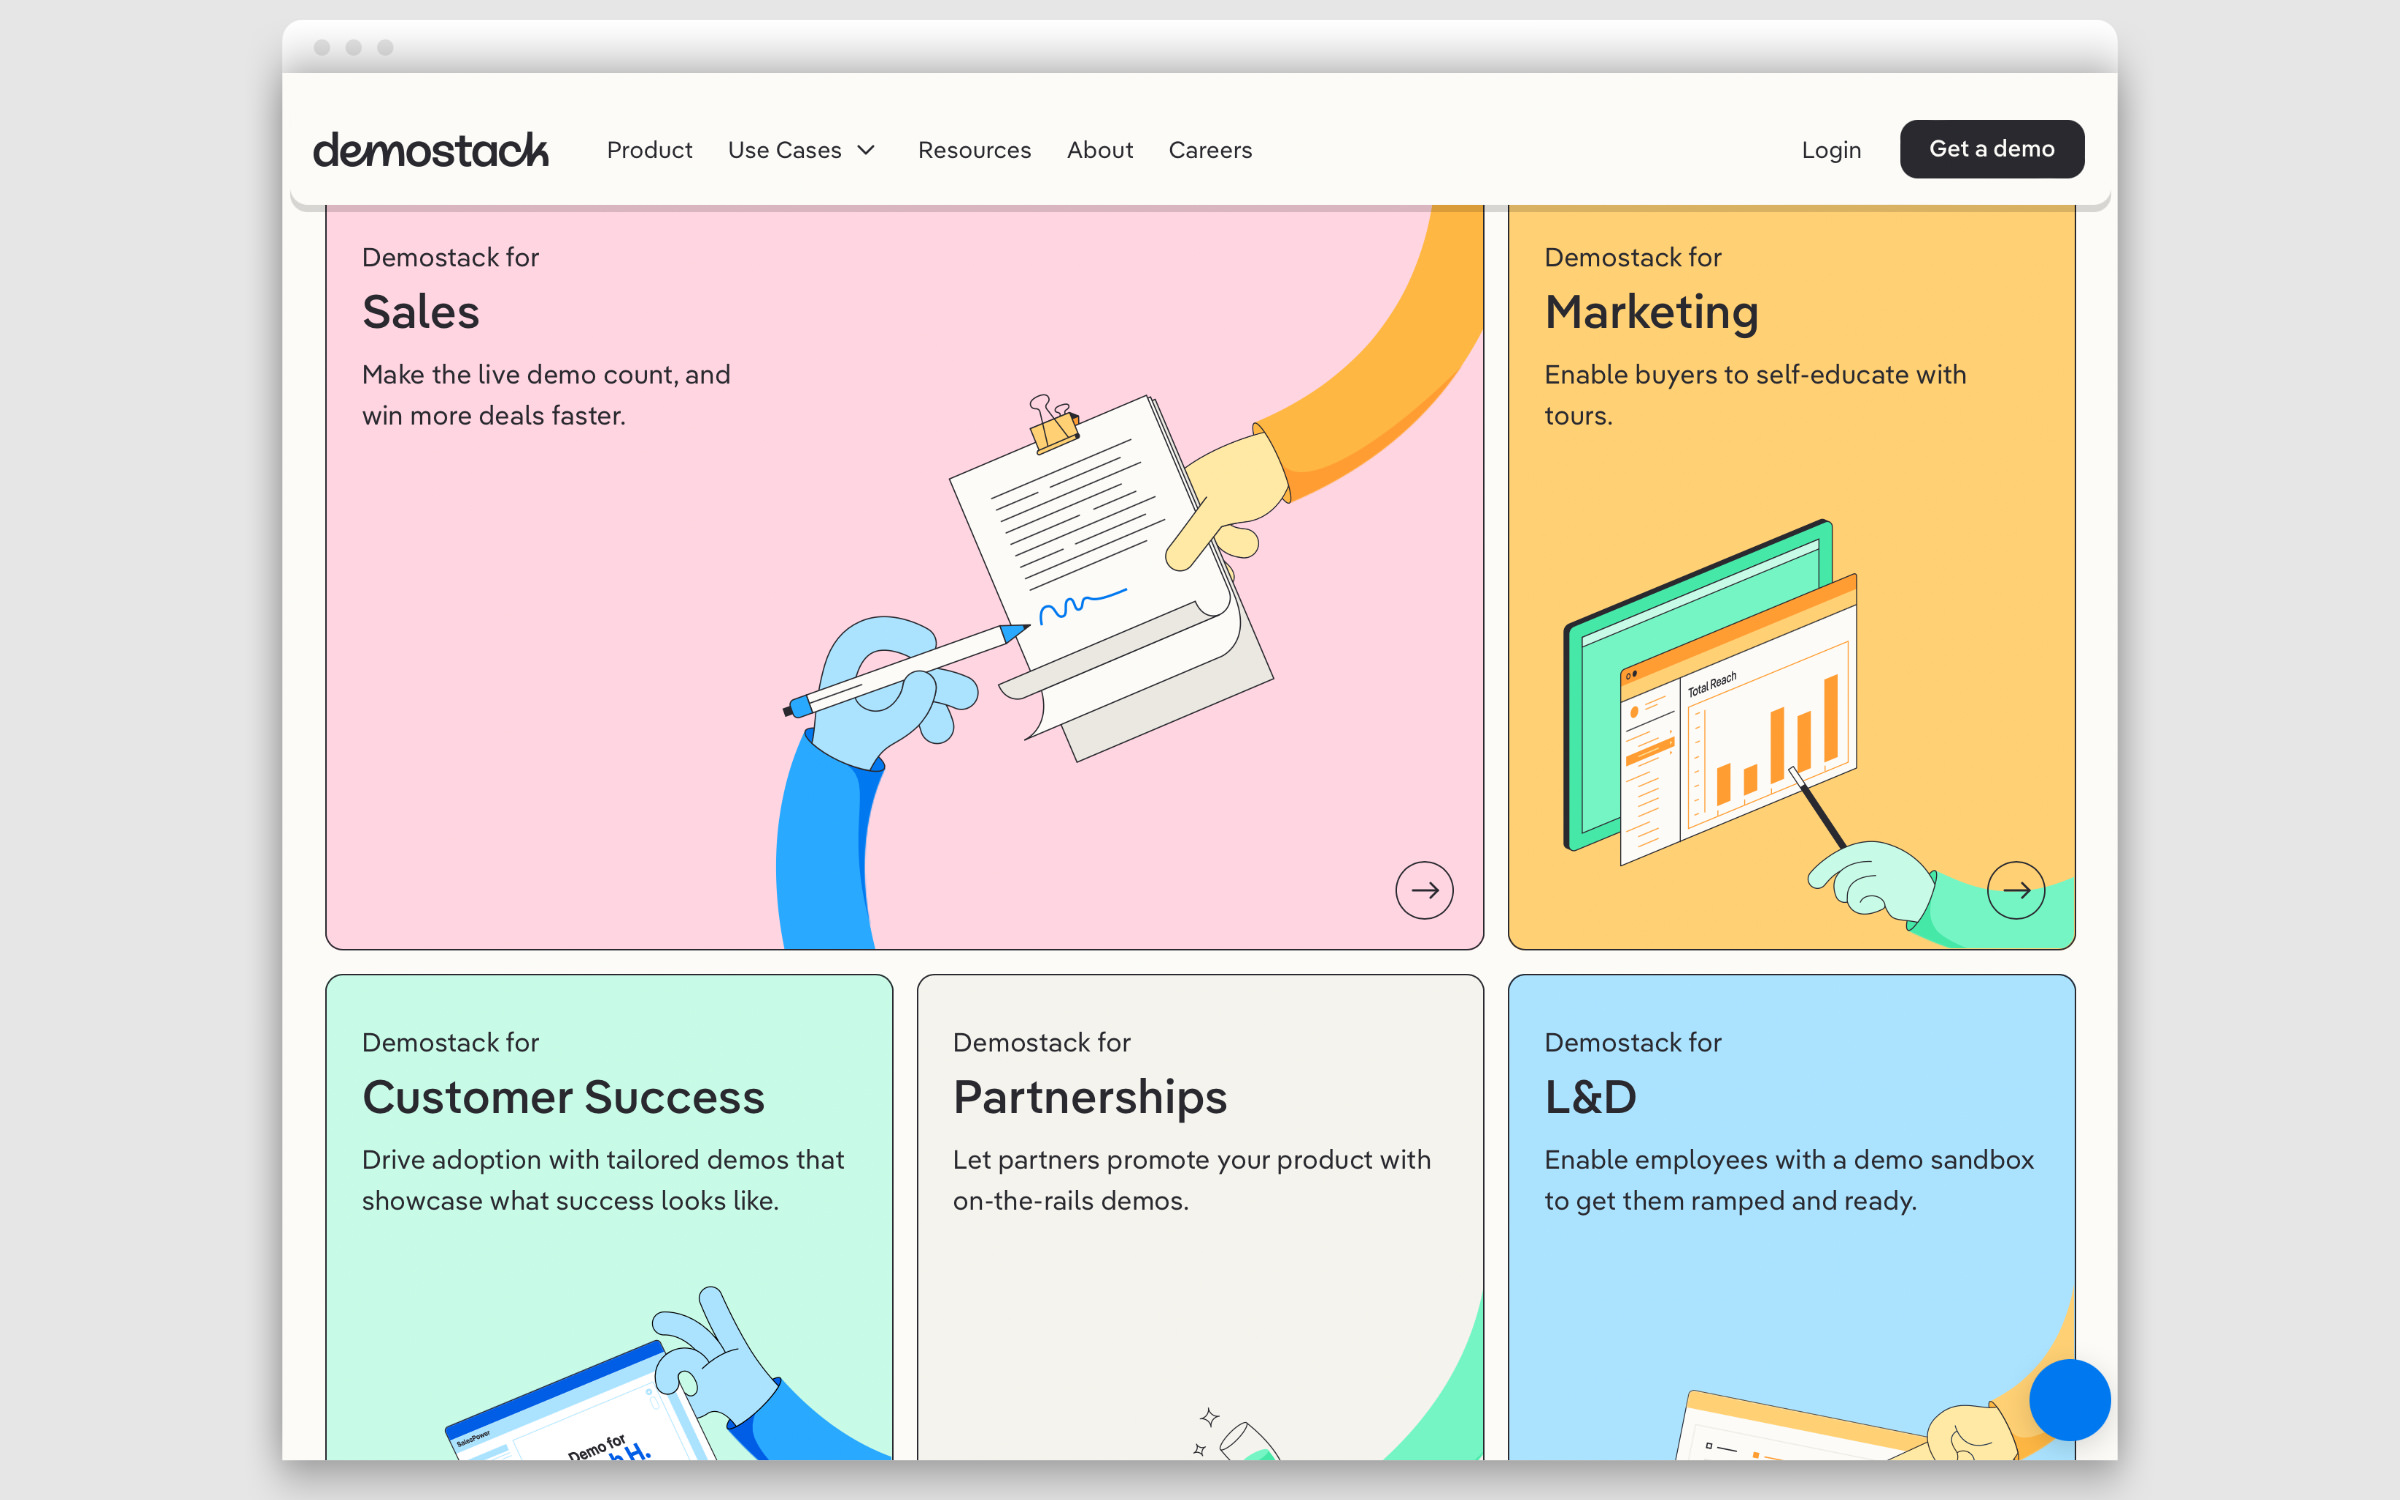 Founded in 2020, Demostack transforms a software-as-a-service (SaaS) product into an easy-to-use demo toolkit for sales teams in a matter of minutes